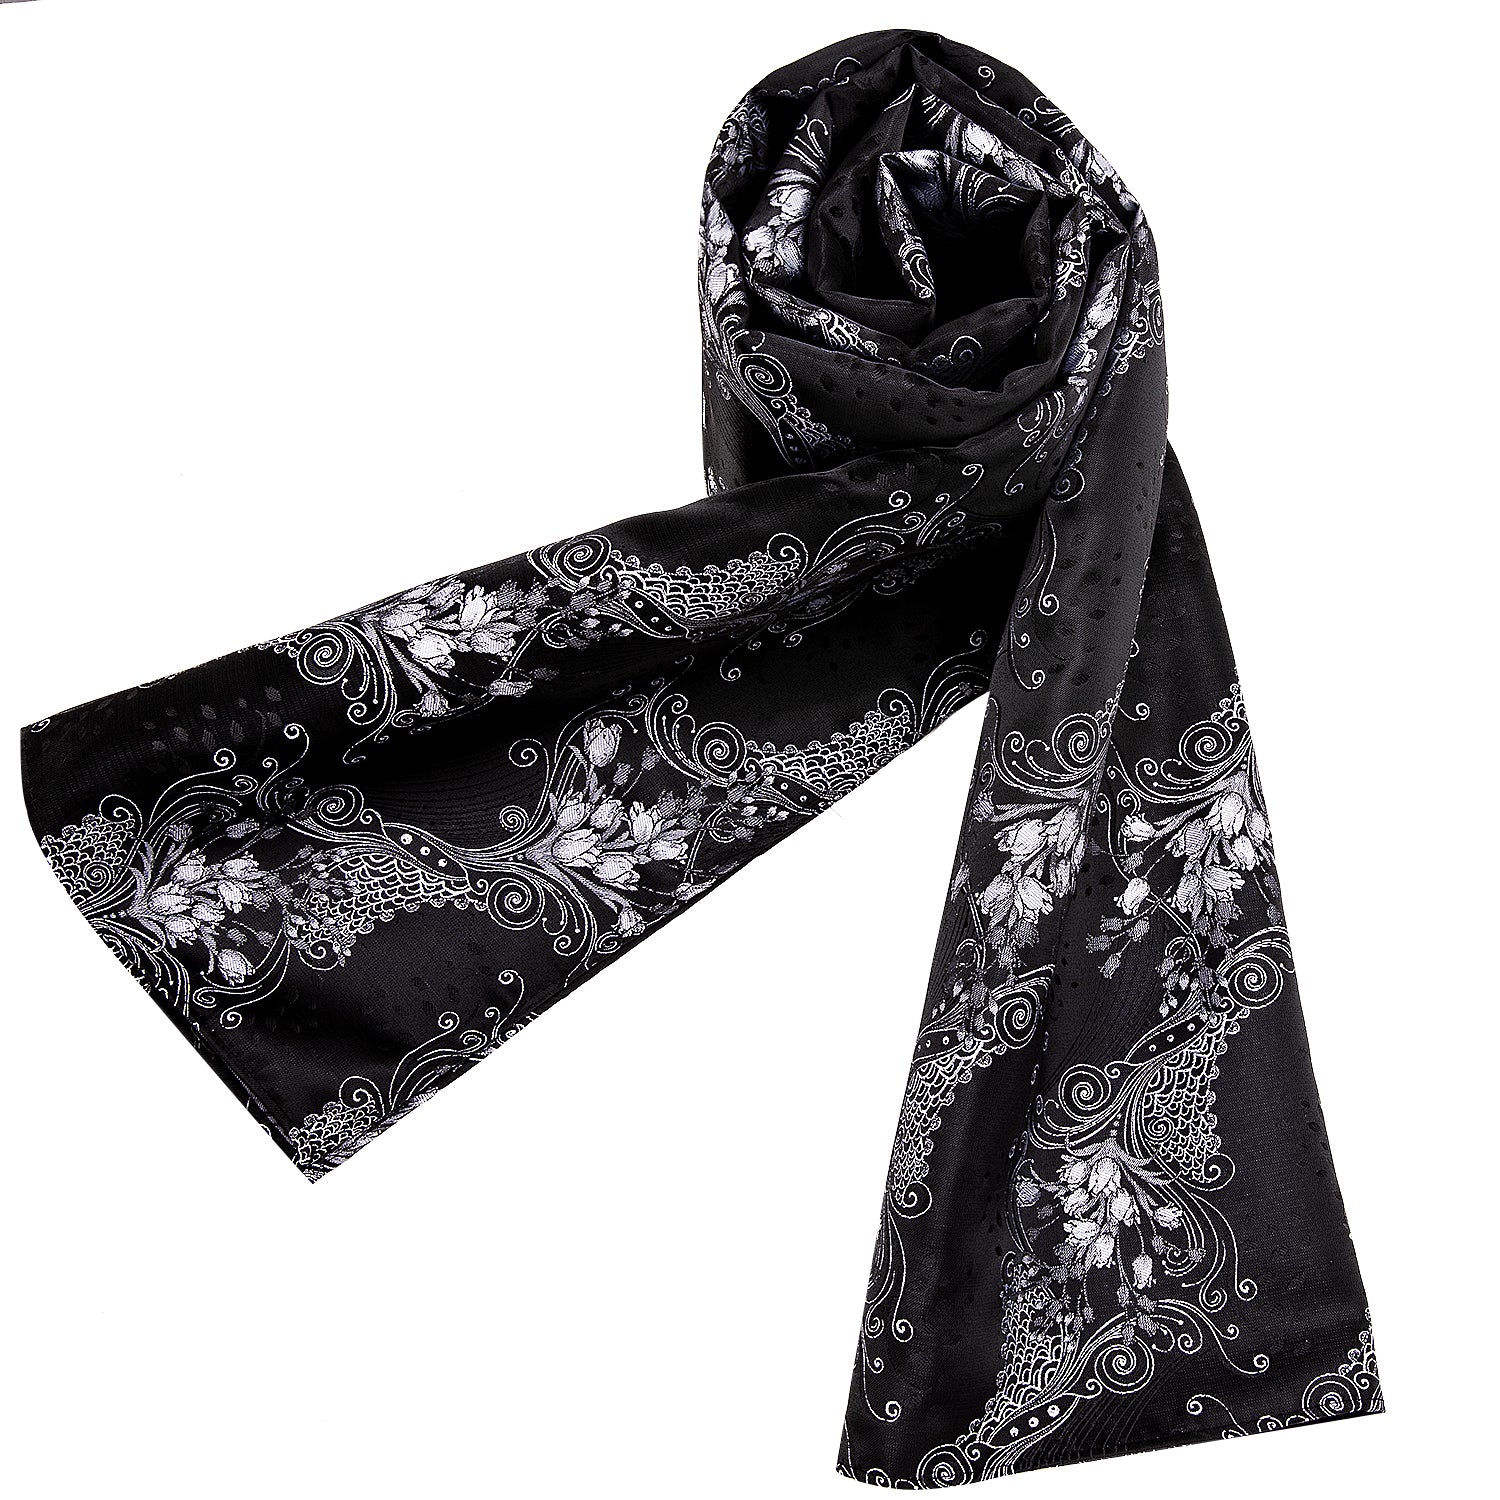 New Luxury Black Silver Floral Scarf  with Tie Set